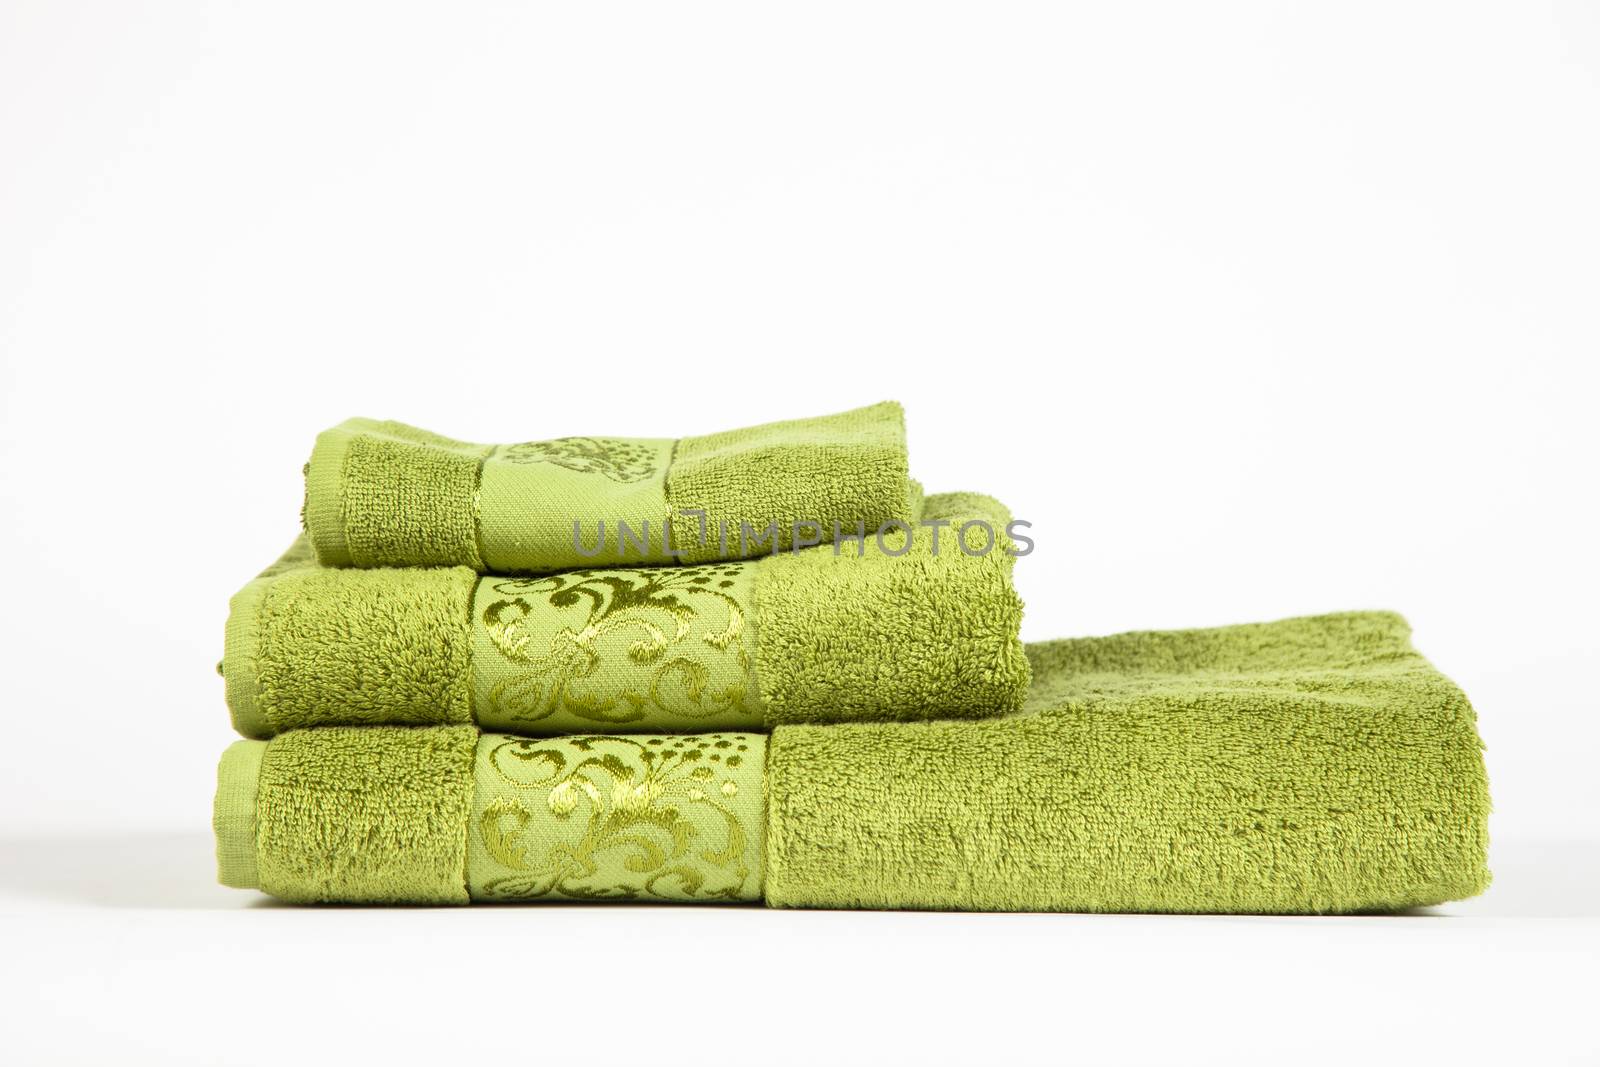 stack of green bathroom towels by VictorO